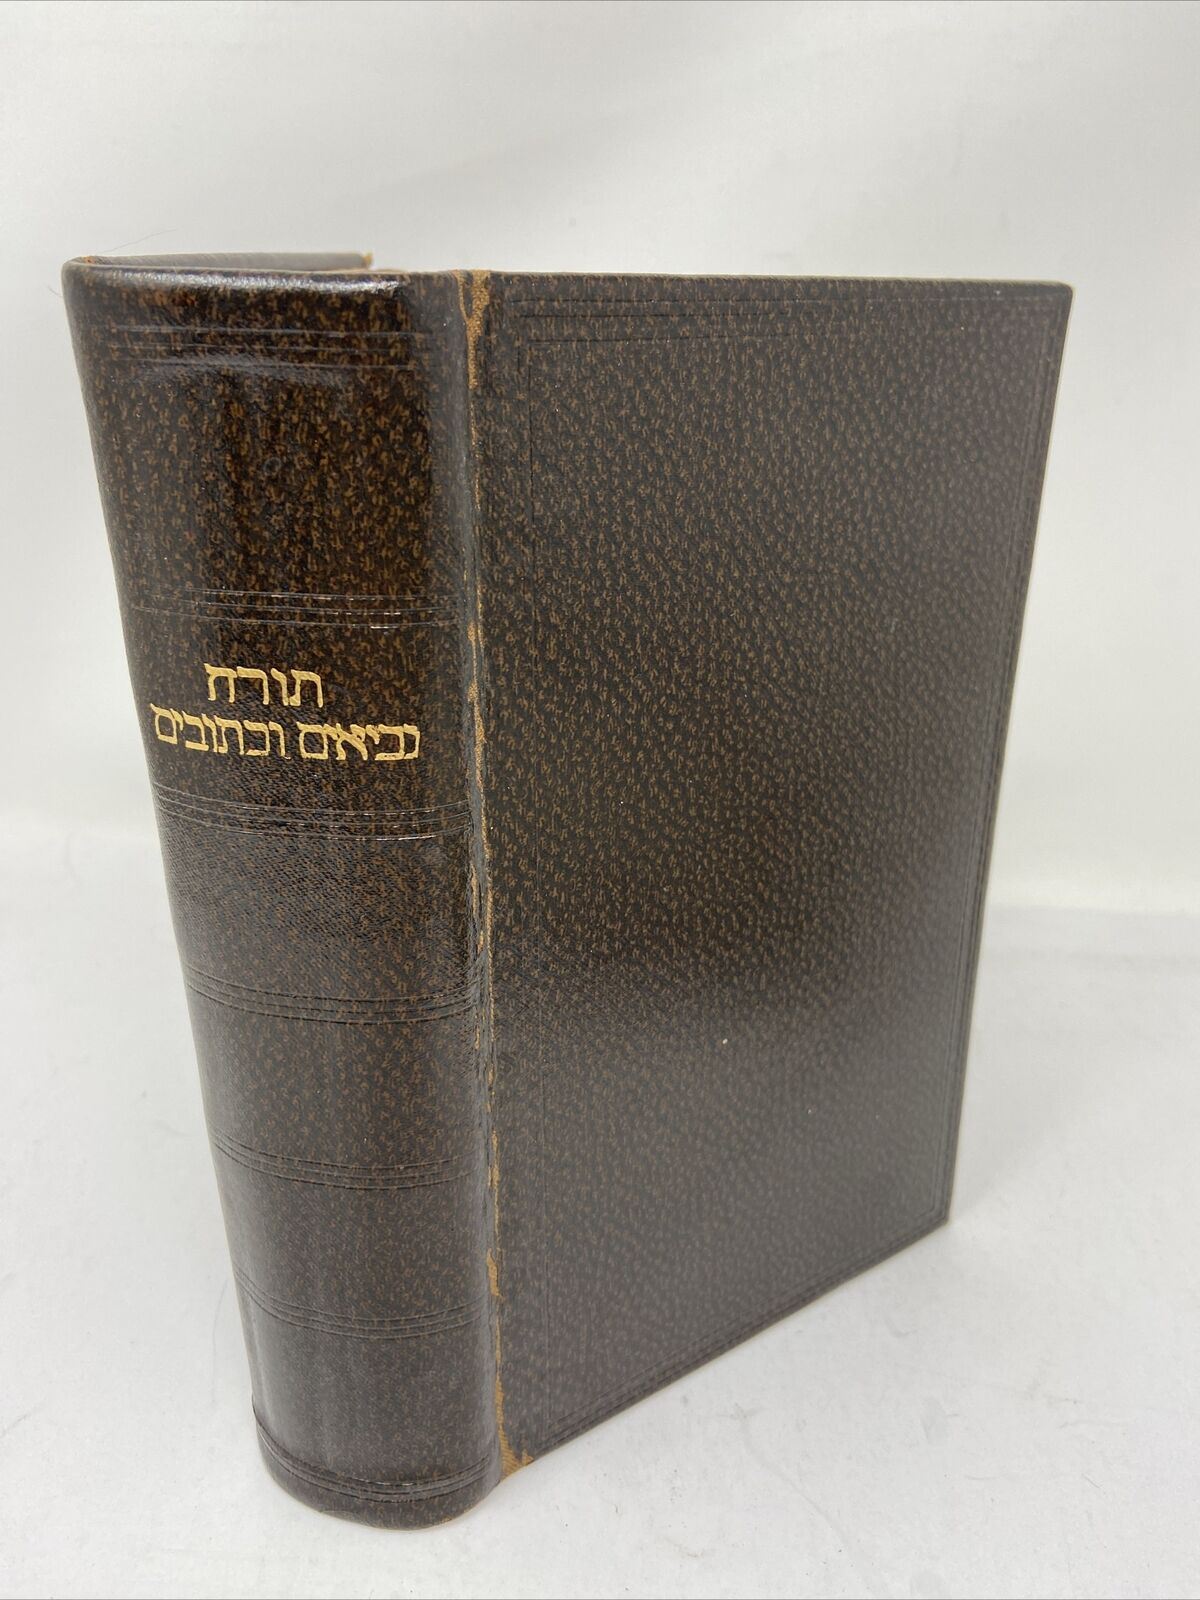 1922 Rare Hebrew Bible Hardcover Made in England Brown 1384 pages Antique